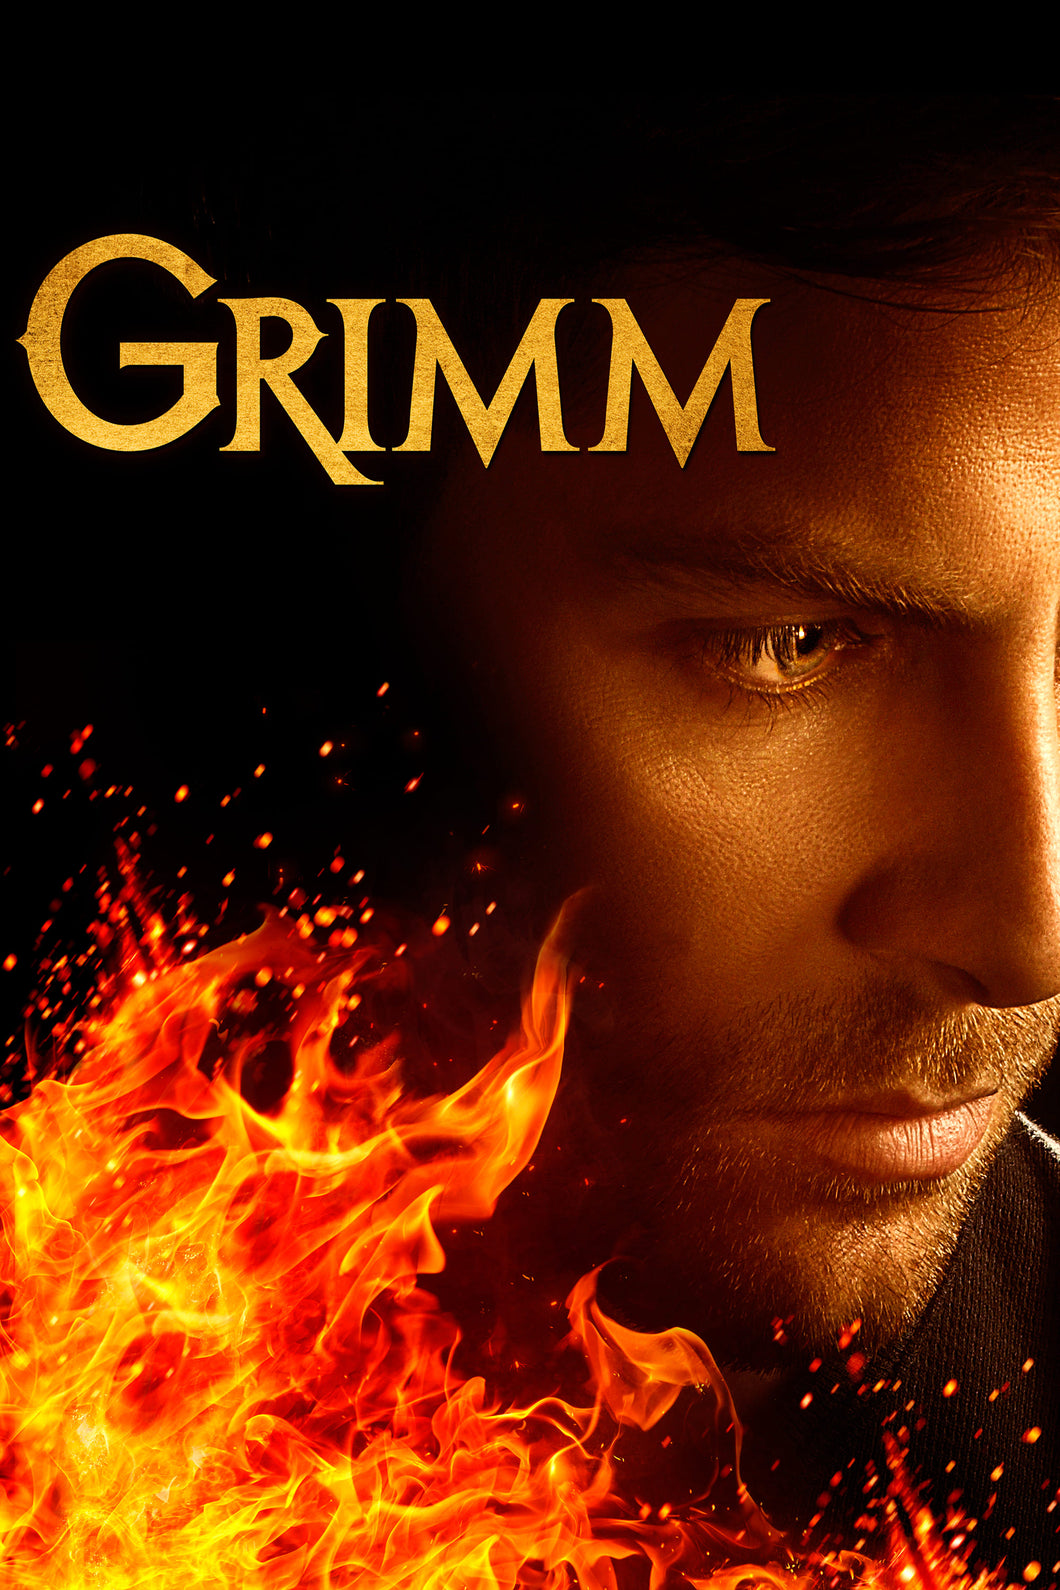 Grimm (2011)v4 TV Series High Quality Glossy Paper A1 A2 A3 A4 A3 Framed or Unframed!!!